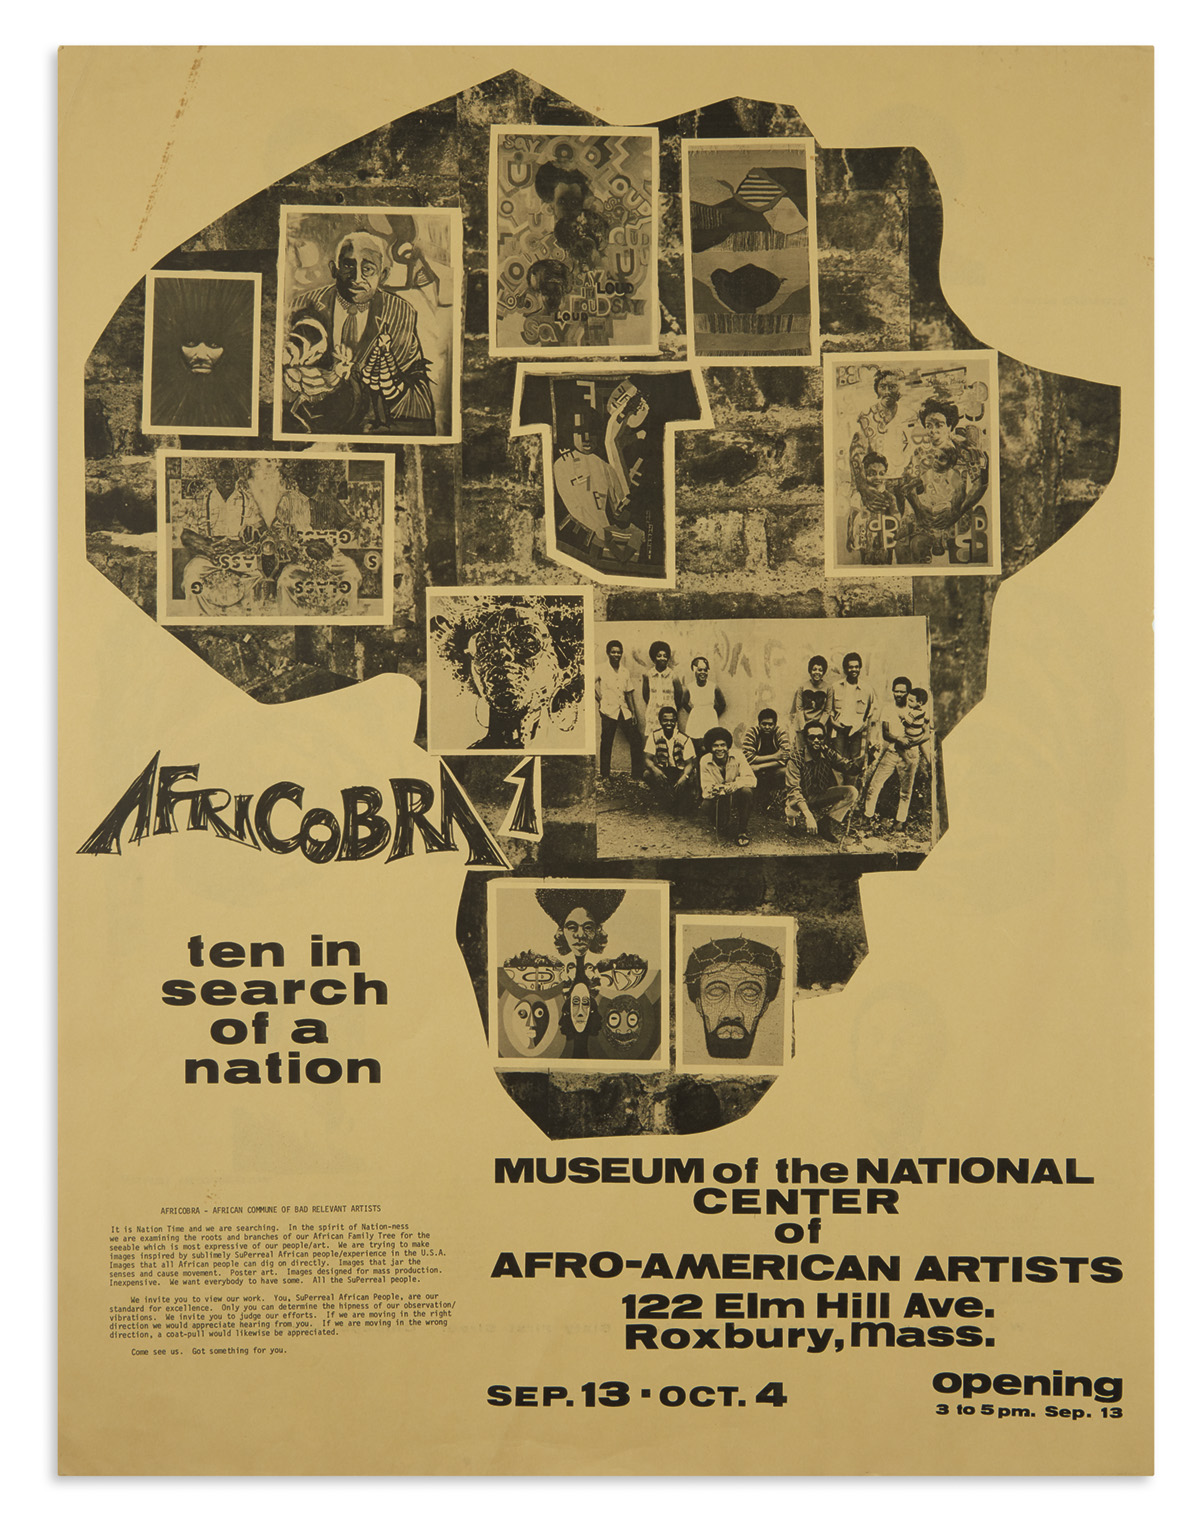 (ART.) Africobra 1: Ten in Search of a Nation.